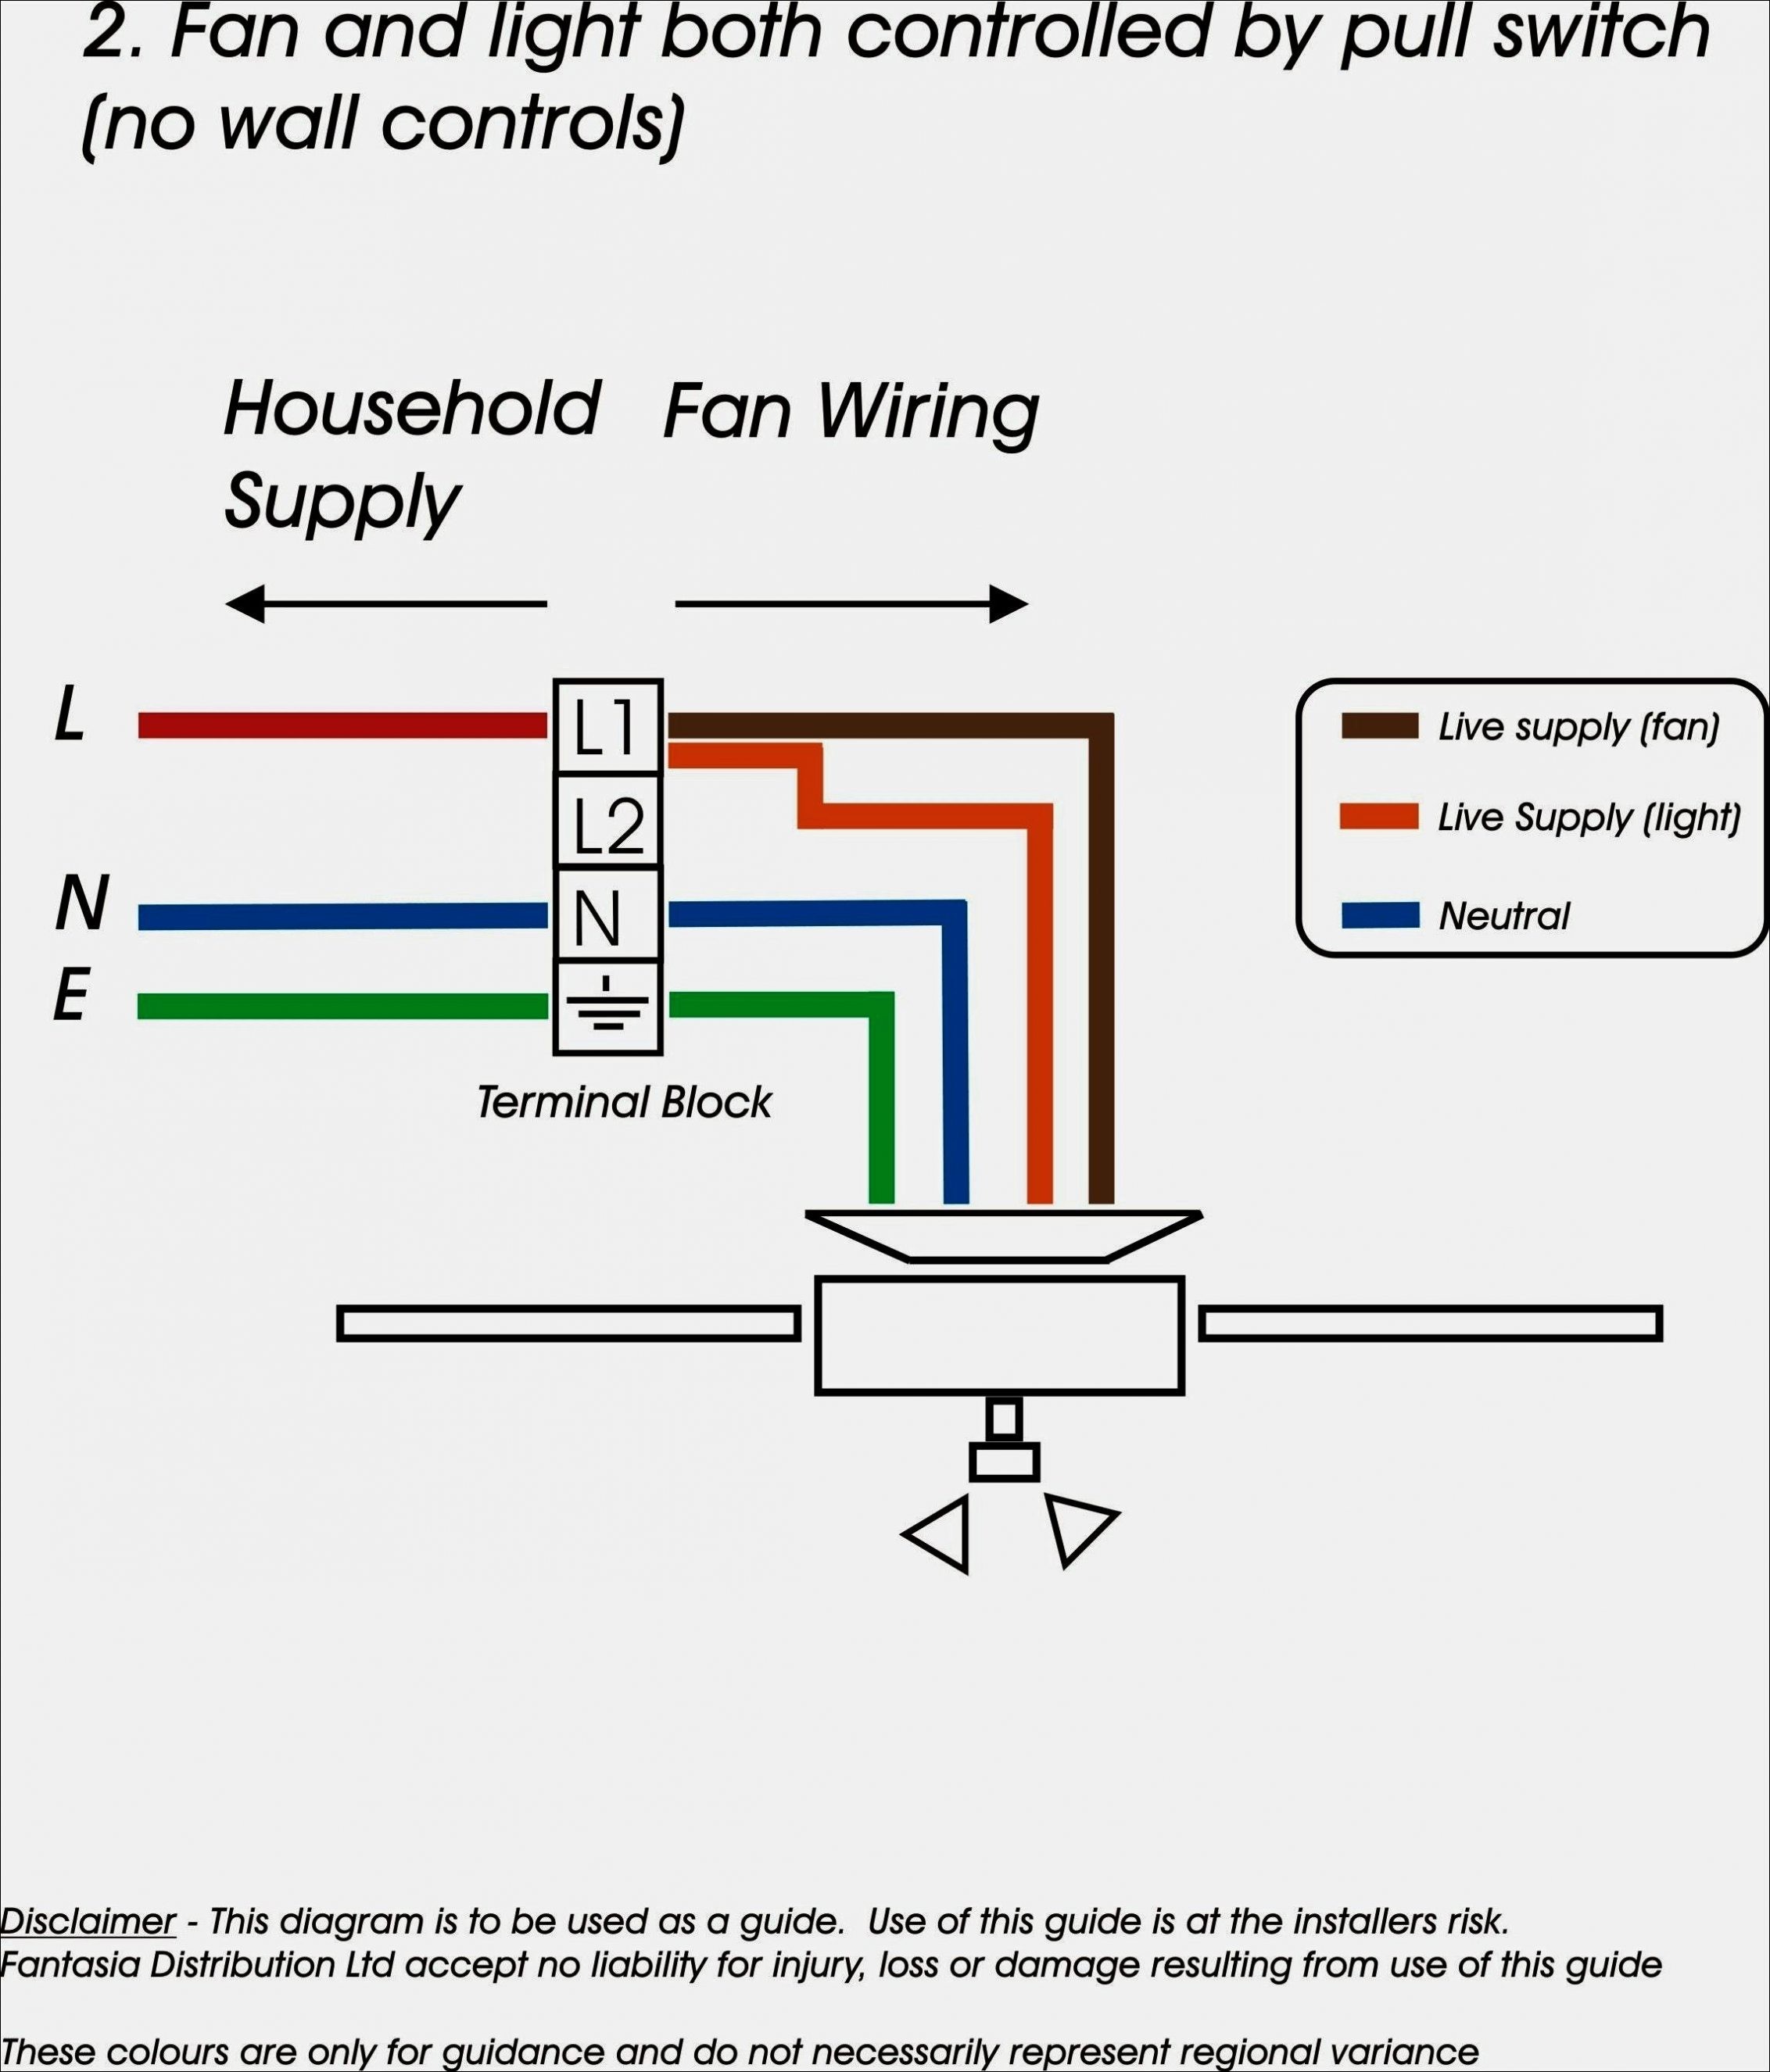 Wiring Diagram for A Harbor Breeze Ceiling Fan New Harbor Breeze 3 Speed Fan Switch Wiring